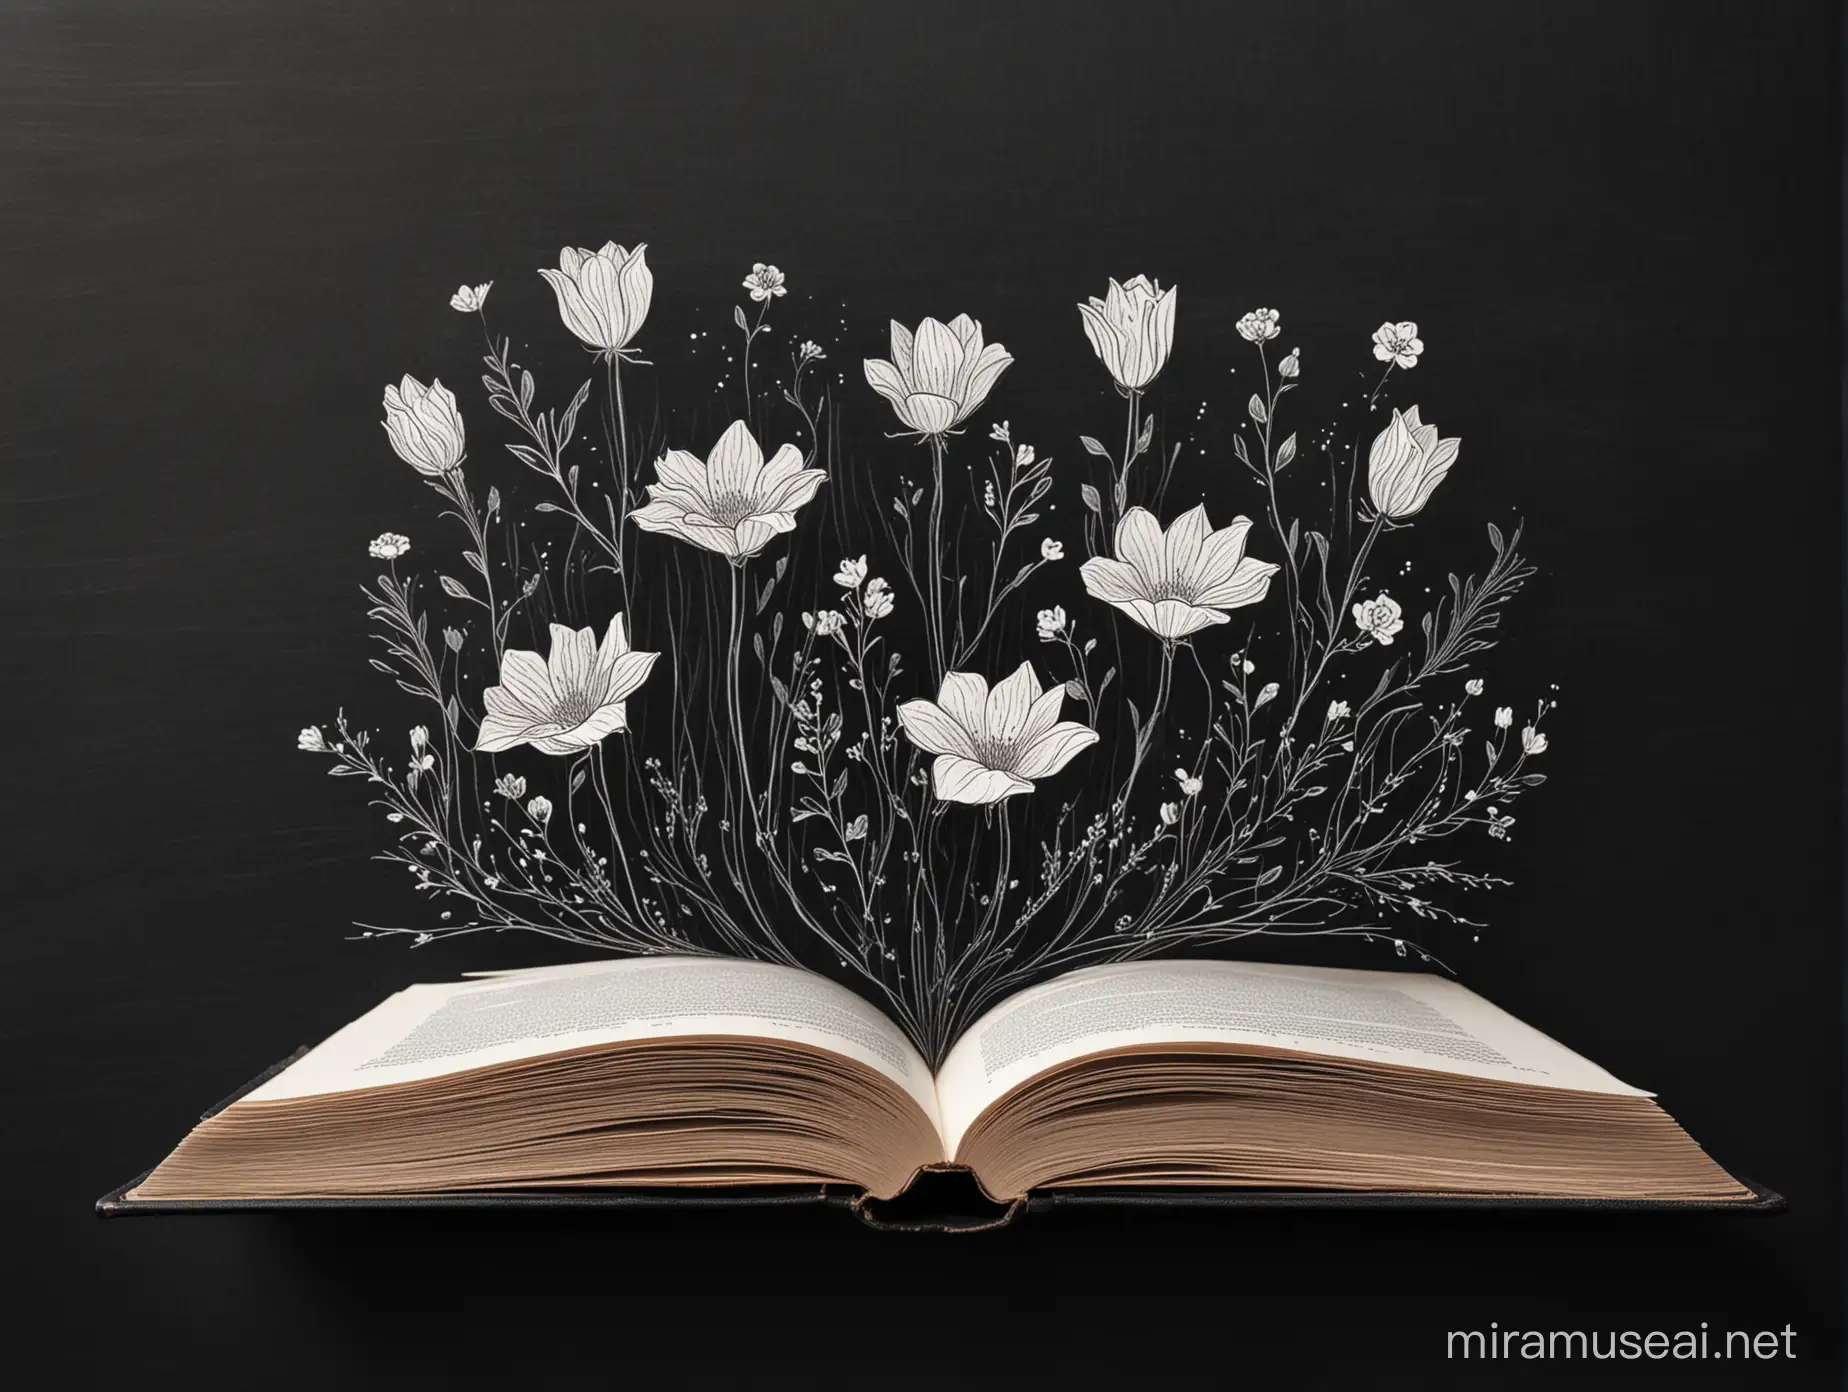 minimalistic side view of an open book with simple white line work flowers blooming from the inside on a dark background